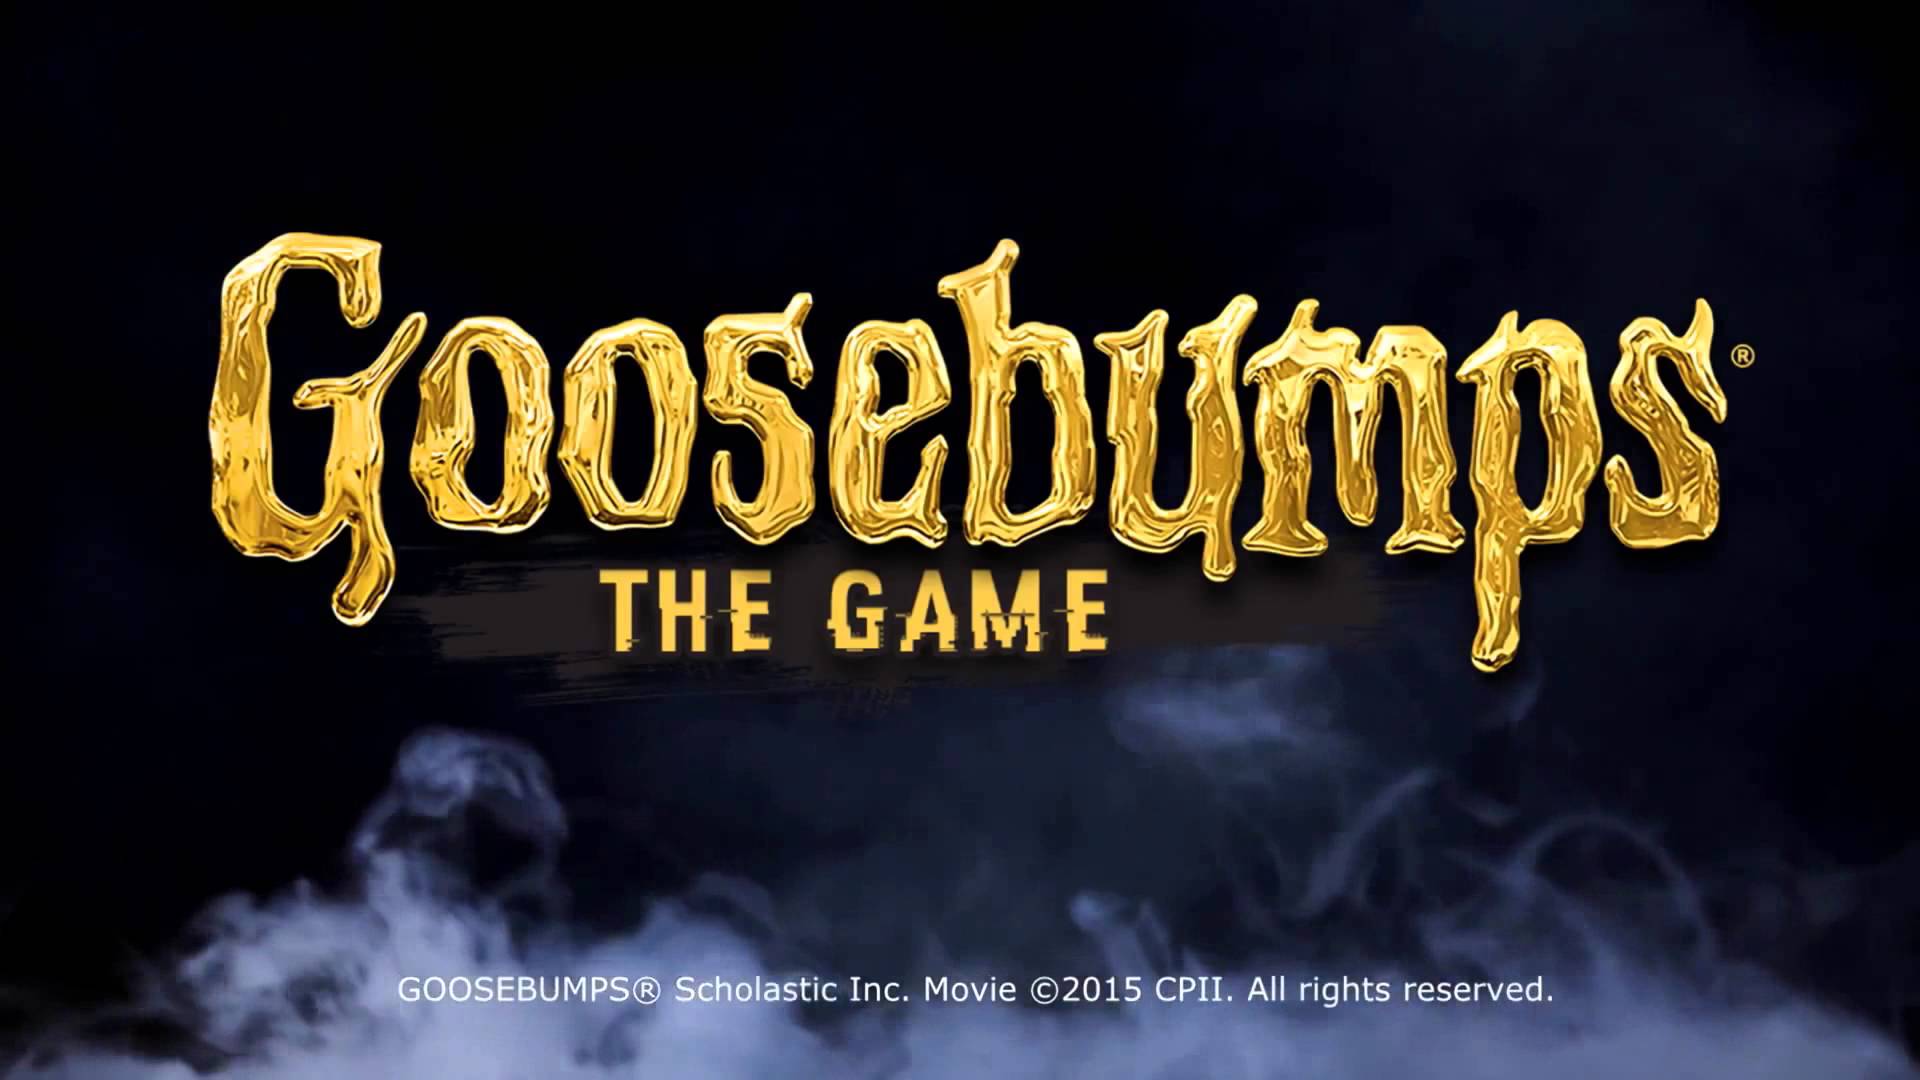 Goosebumps The Game Review Xbox One Games, Brrraaains & A